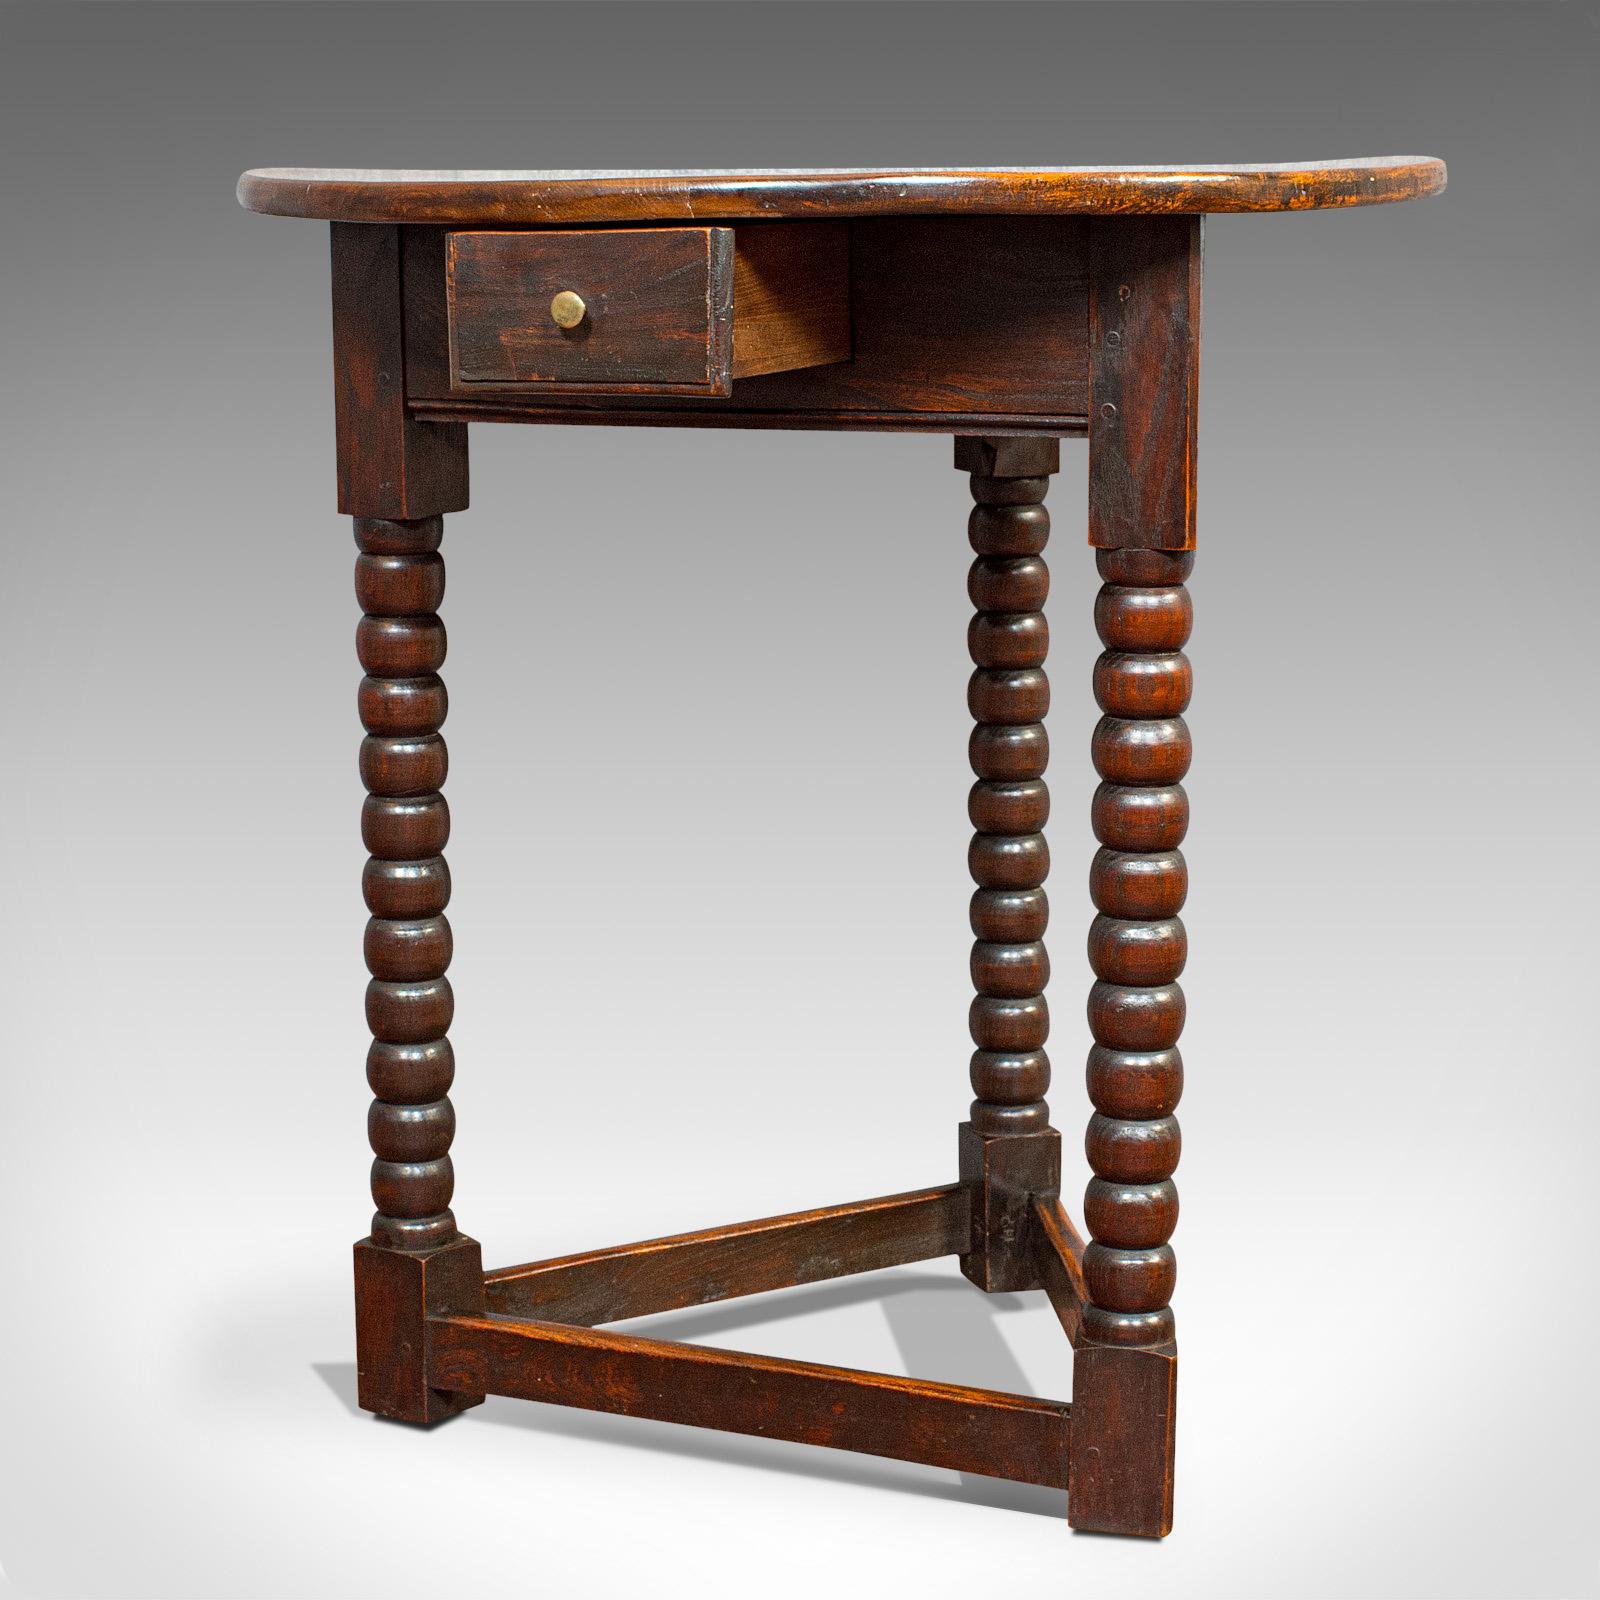 This is an antique cricket table. An English, elm lamp or side table with drawer, dating to the Victorian period, circa 1890.

Fascinating table with appealing form
Displays a desirable aged patina
Select elm with rich, consistent hues and fine